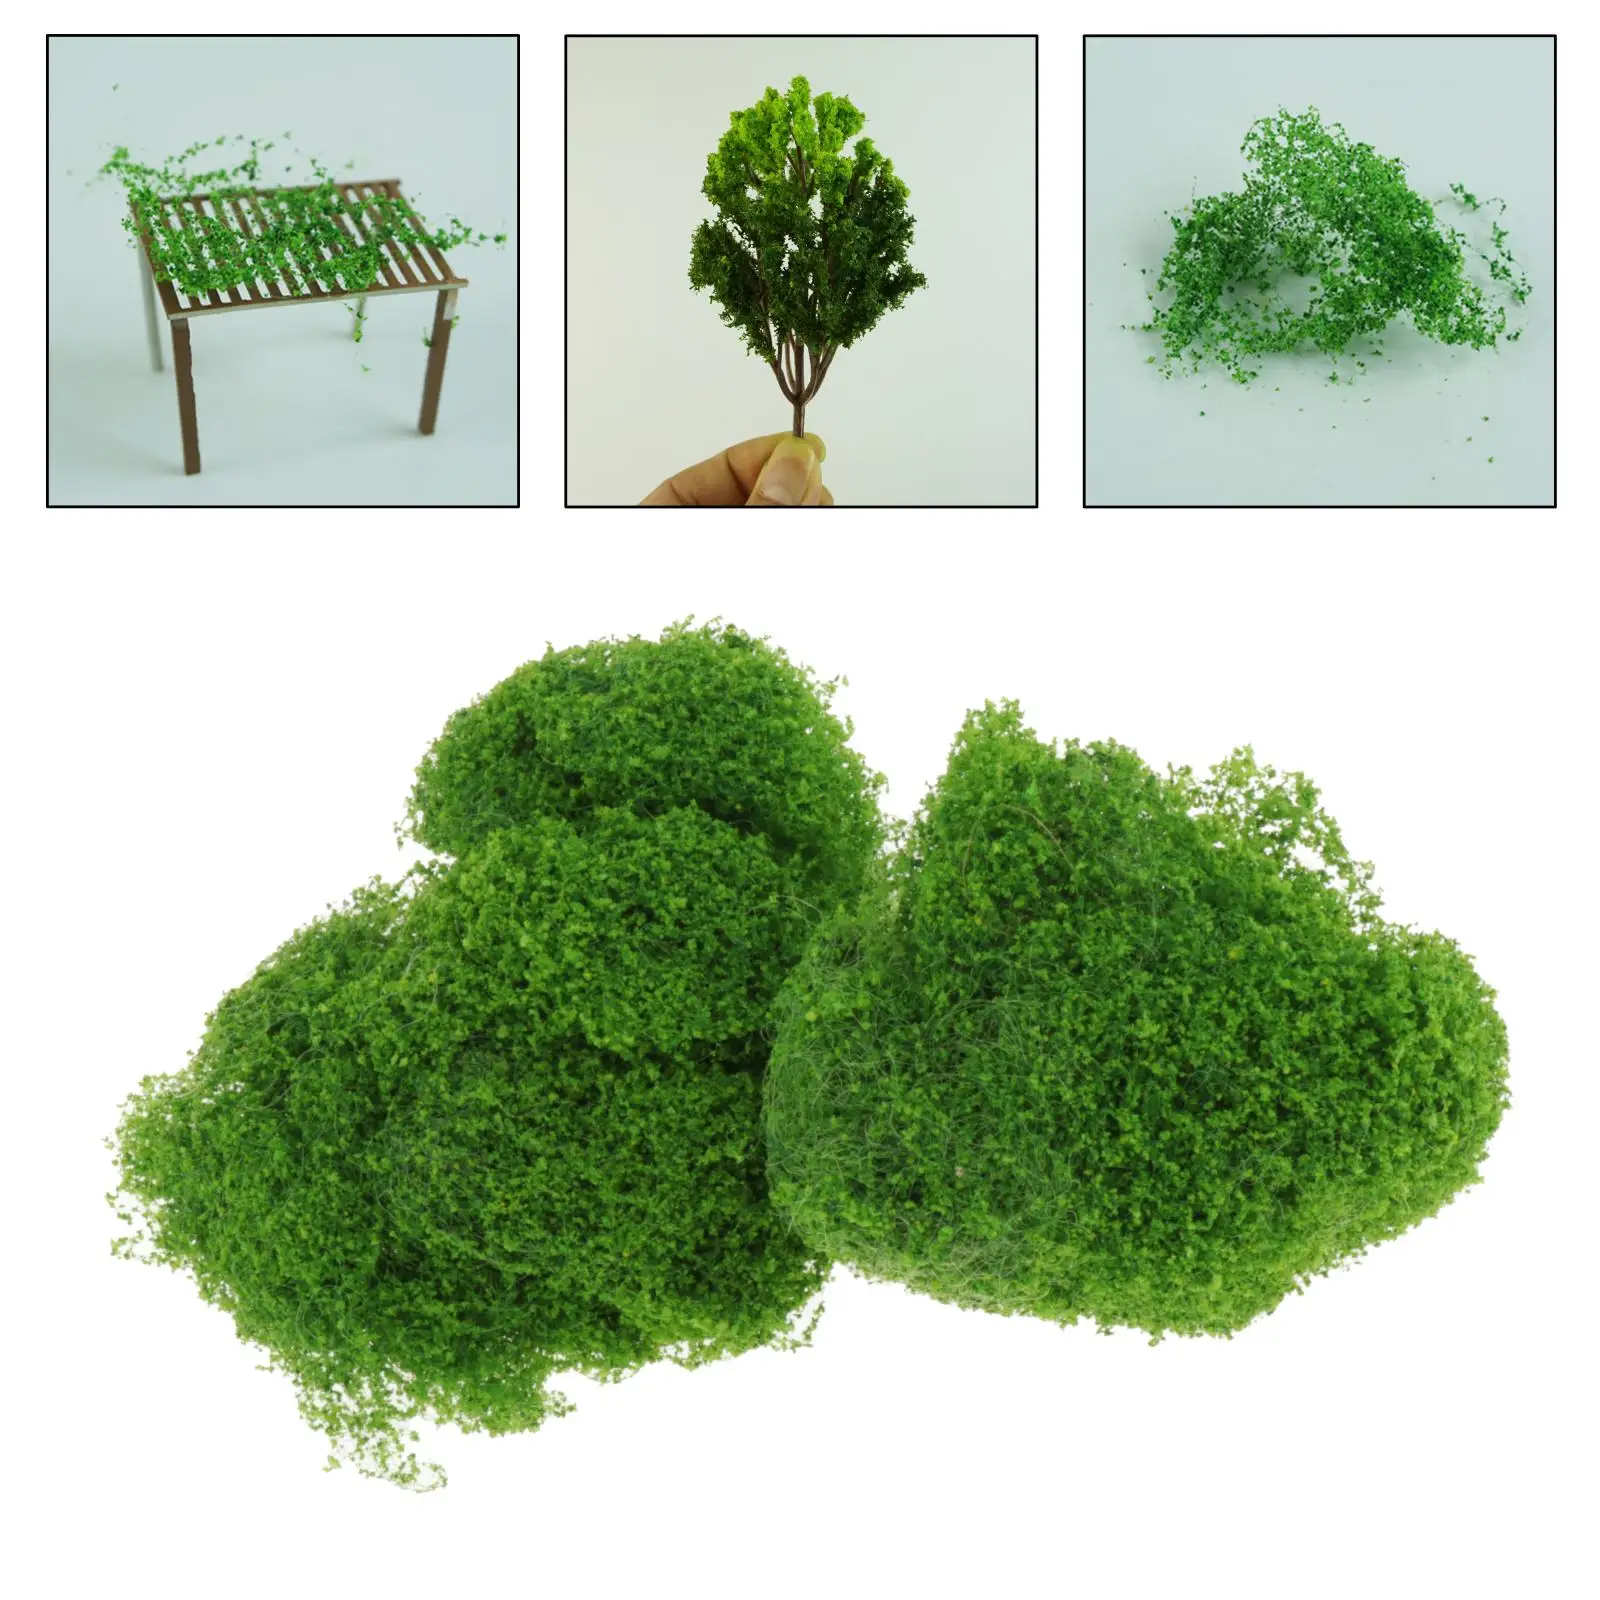 10g Model Static Grass Powder, Fake Grass for Miniature ,Terrain Landscape DIY Artificial, Sand Table Scenery Railway Layout